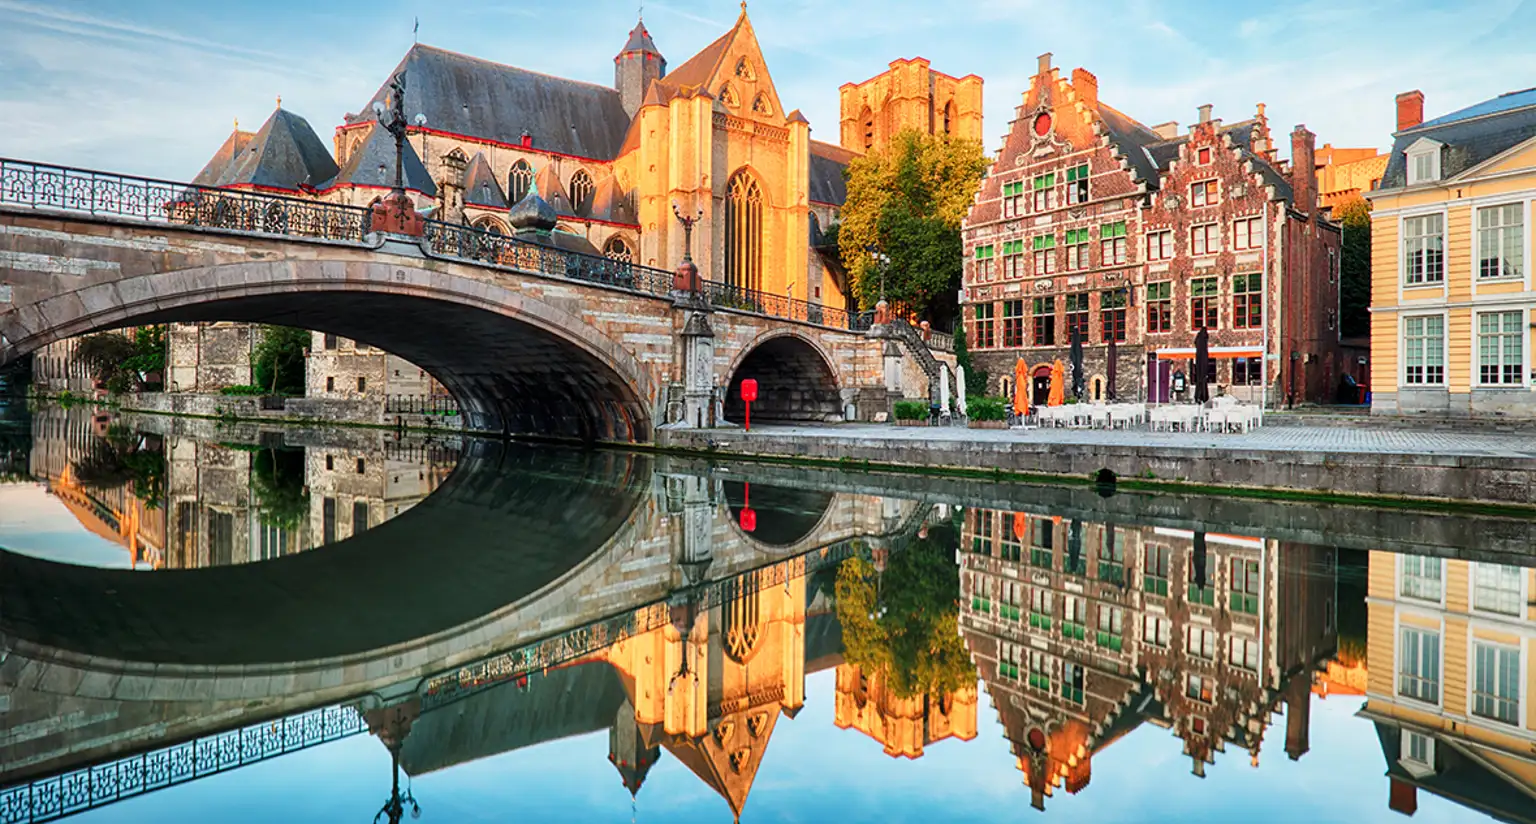 Day trips to Belgium